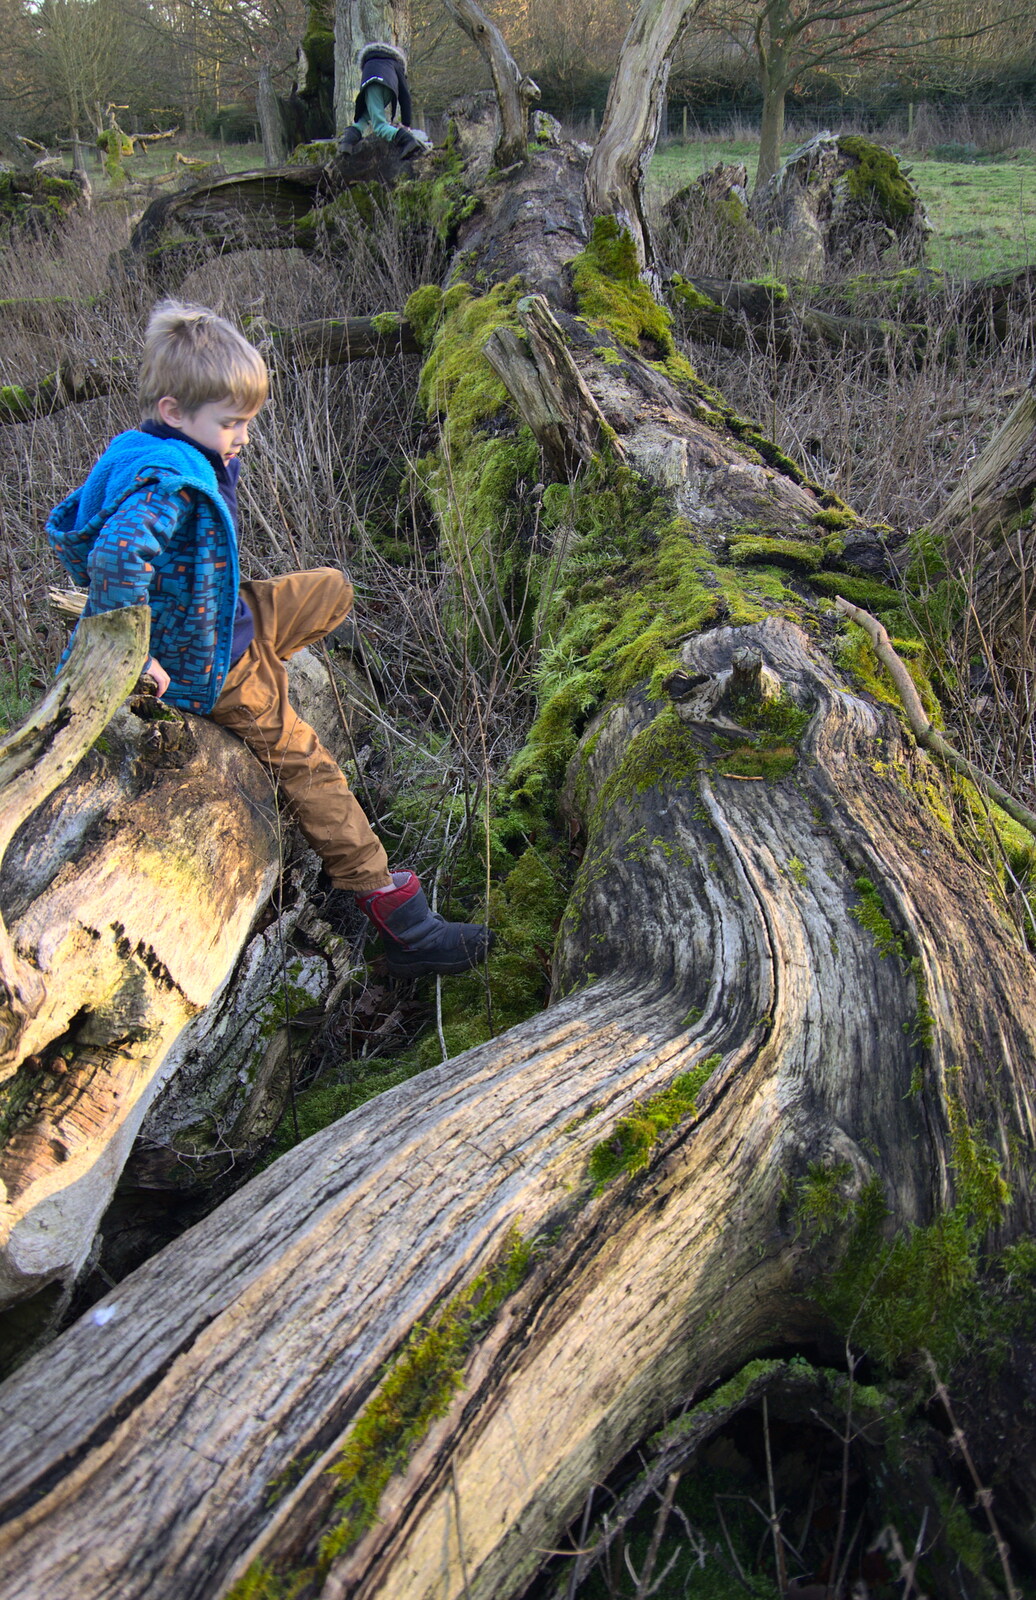 Harry and Fred on a massive fallen-down tree stump from Life Below Stairs, Ickworth House, Horringer, Suffolk - 28th January 2018